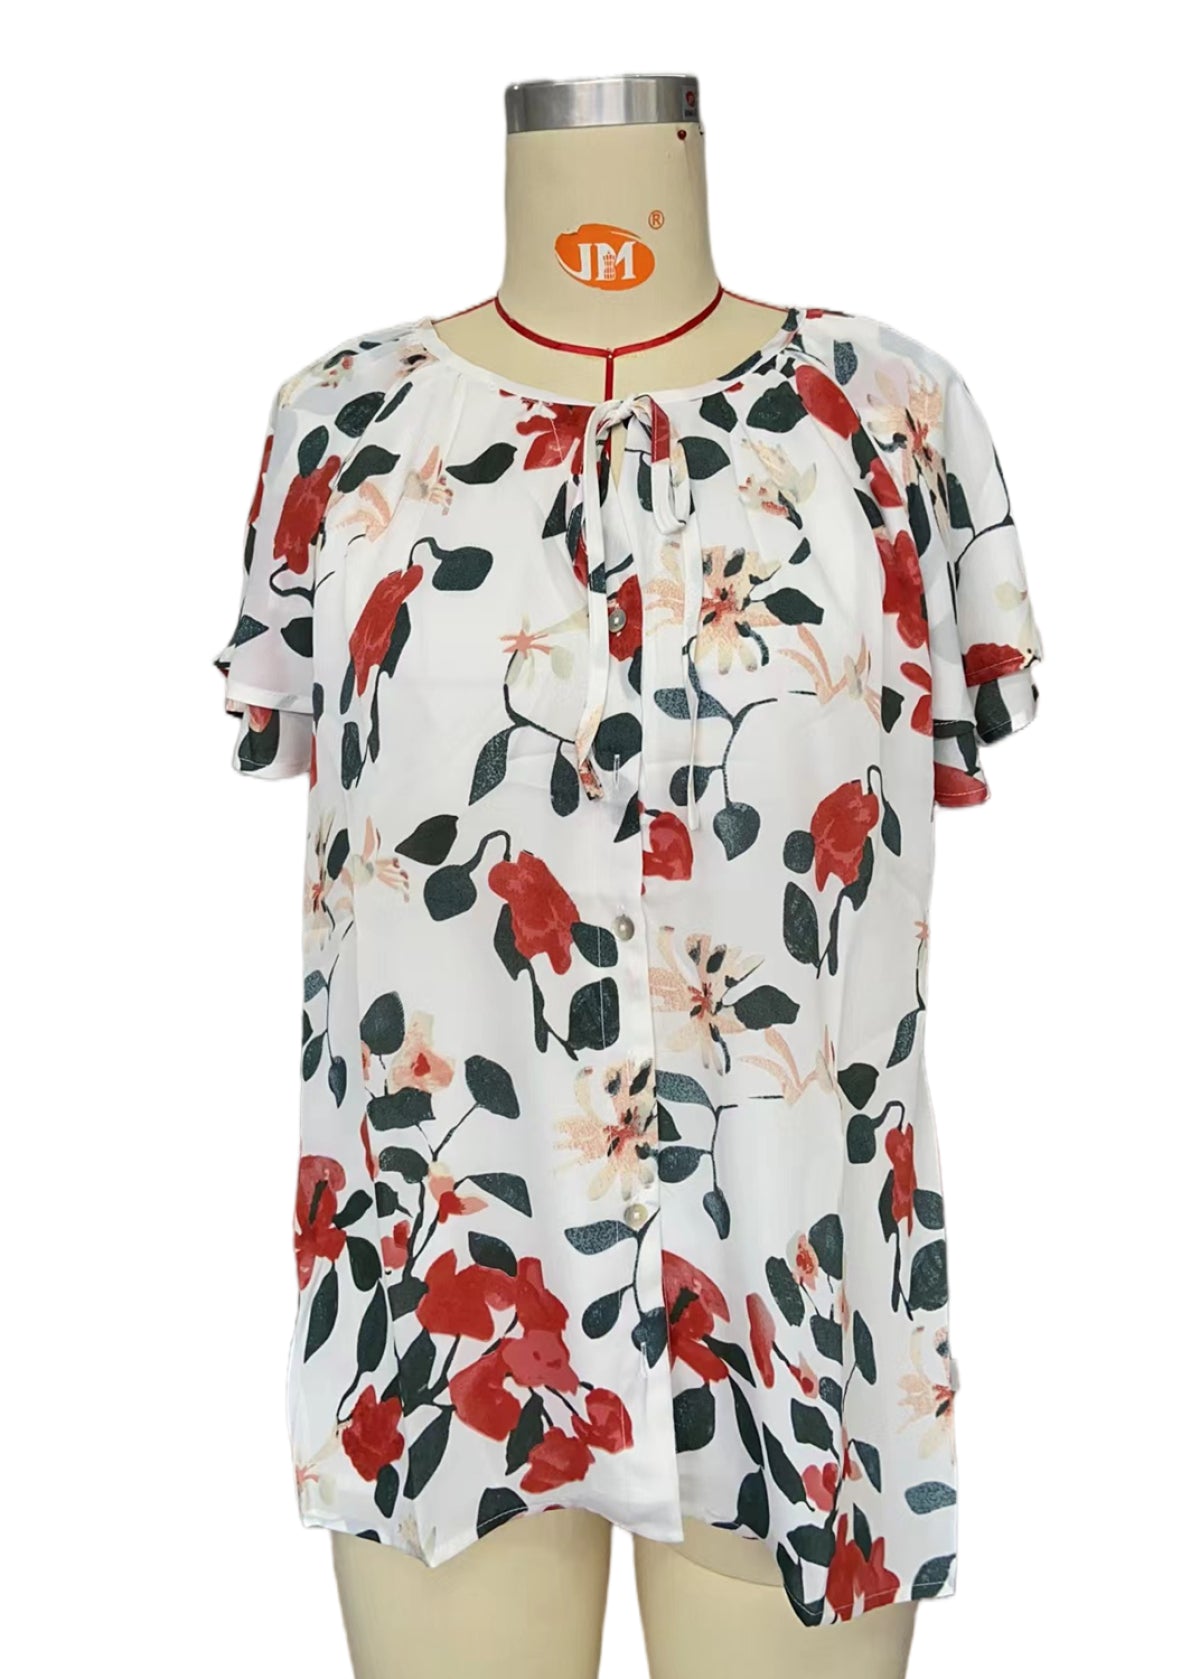 White Floral Print Buttons Tiered Ruffled Short Sleeve Shirt